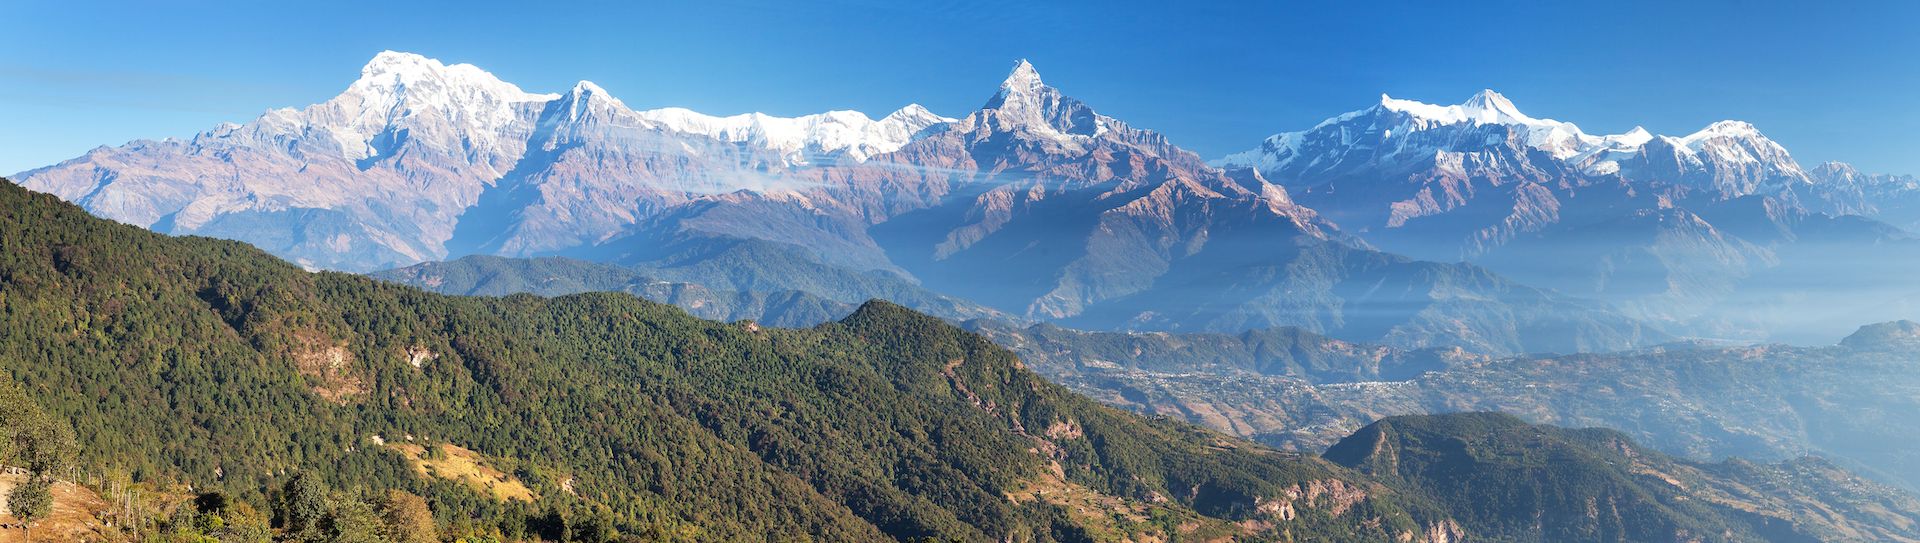 Machhapuchhare (Fishtail) – A Trekker’s Paradise in the Heart of the Himalayas